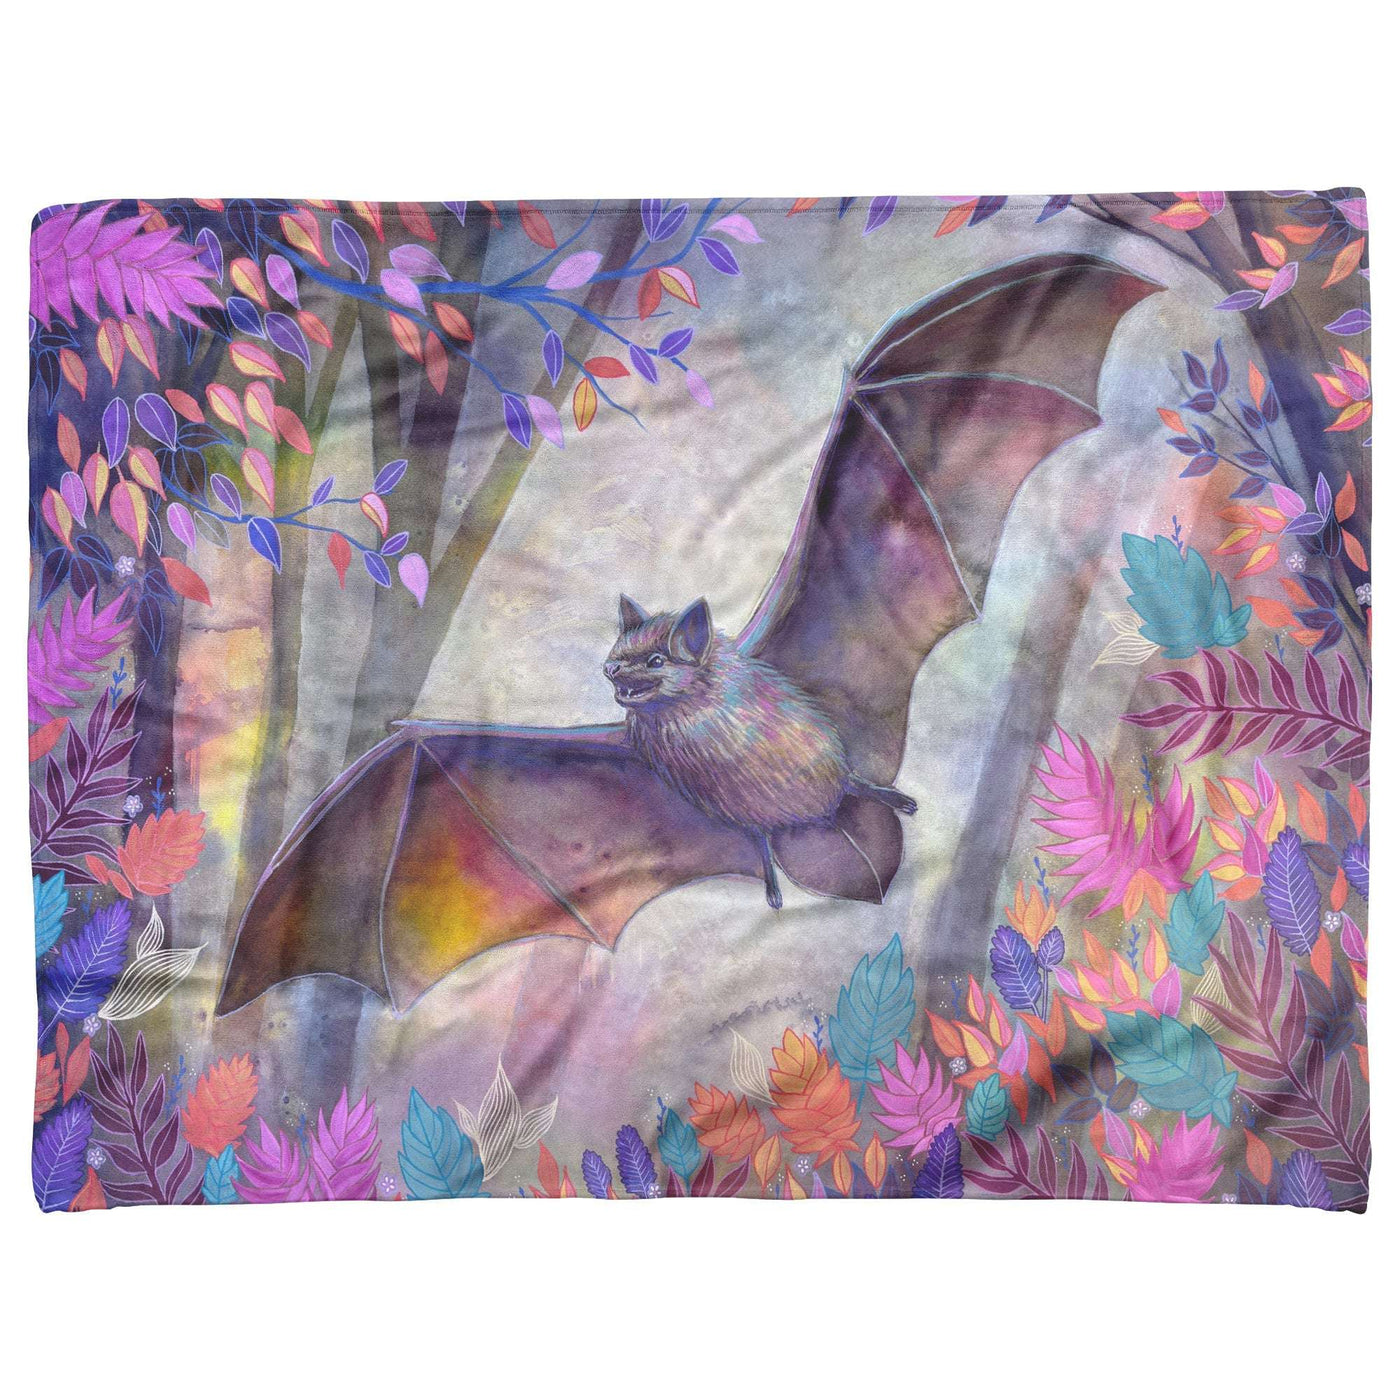 A Bat Blanket with an illustration of a bat with outstretched wings amid colorful, stylized foliage on a watercolor background.